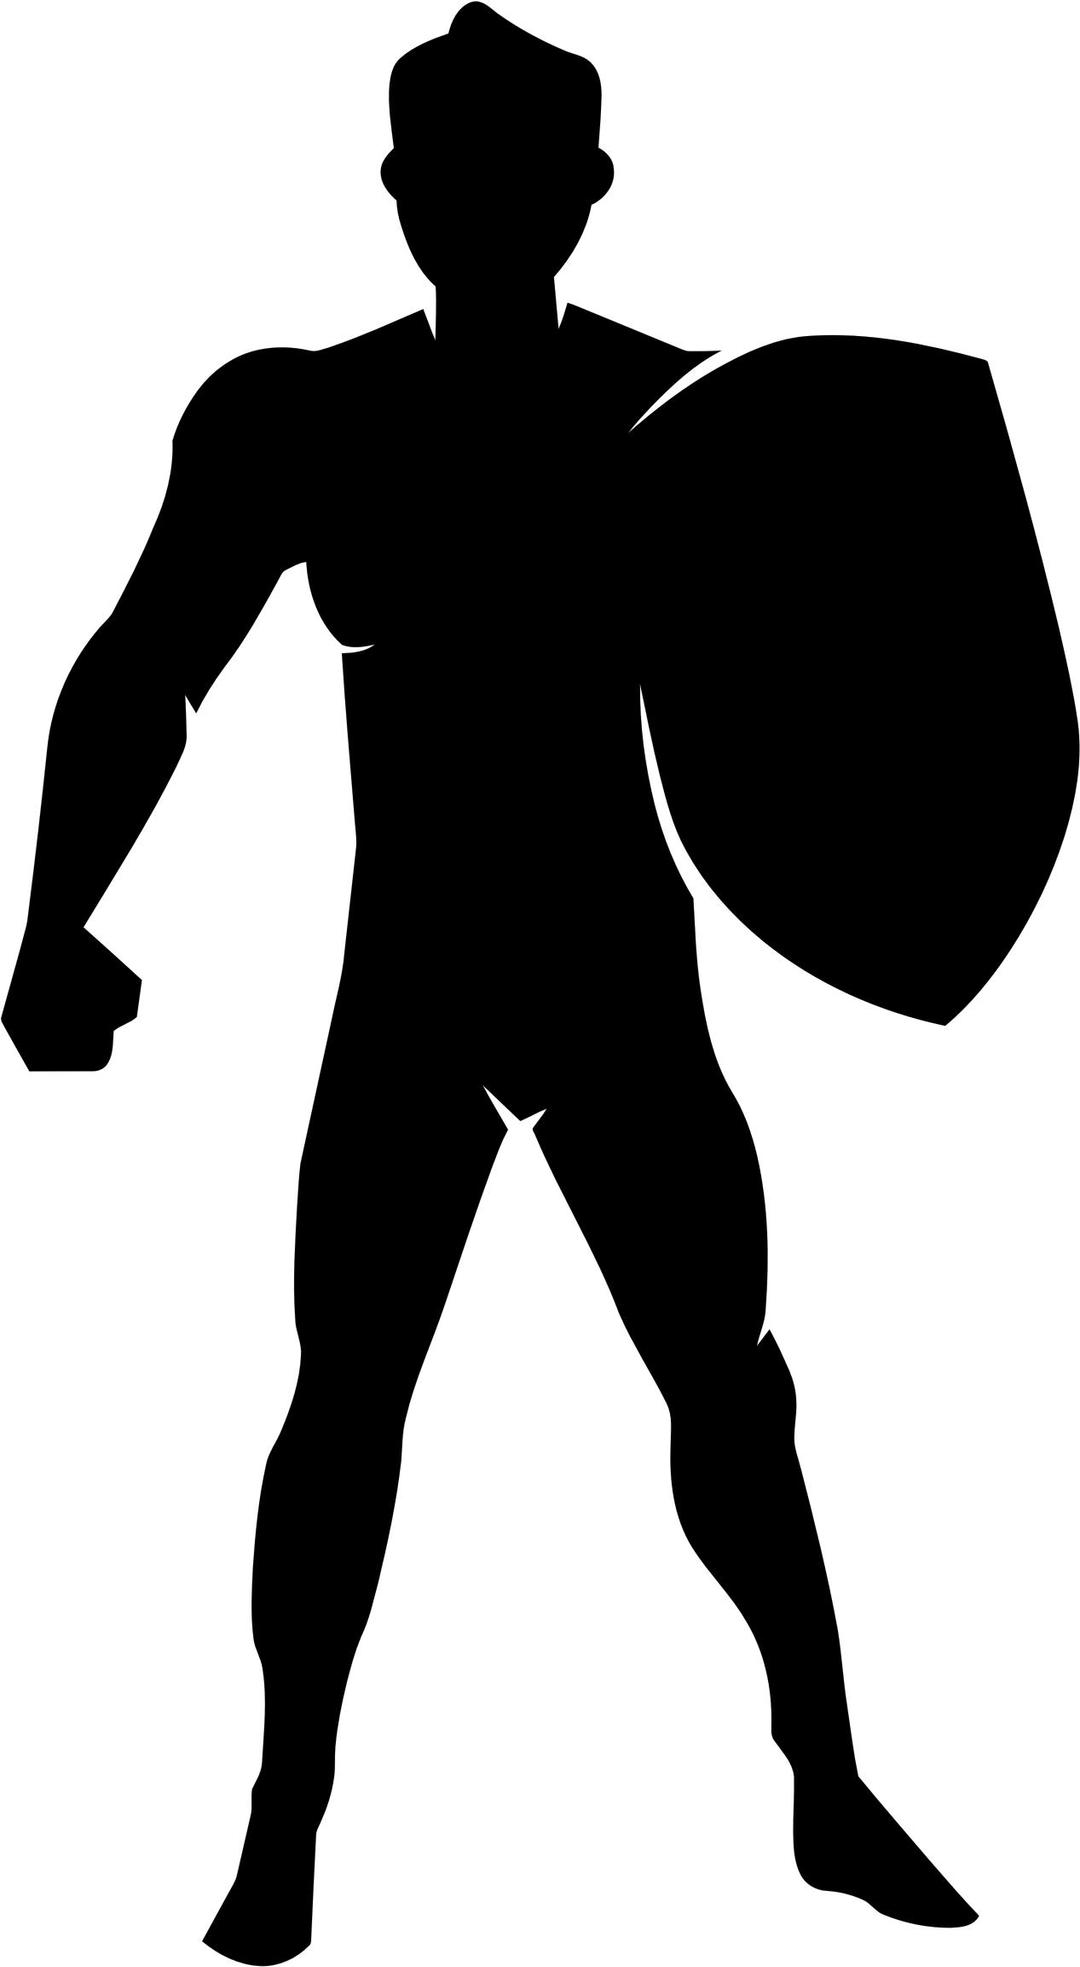 Man With Shield Silhouette png transparent